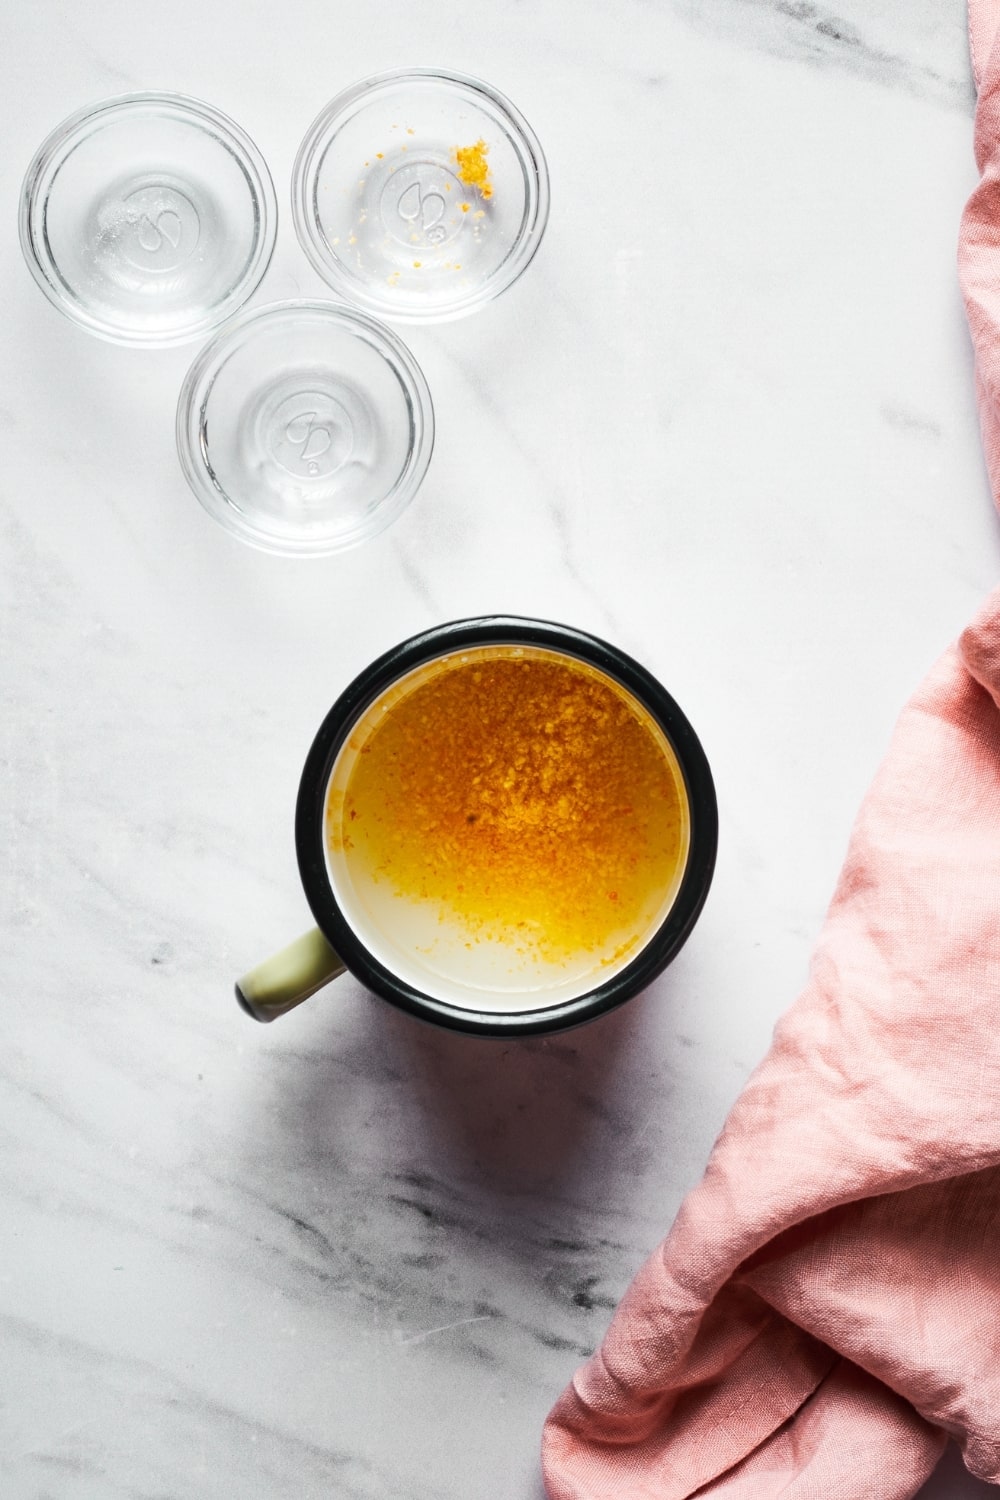 A cup filled with orange zest, water, and erythritol on a white counter. In front of it is three empty small glass bowls.